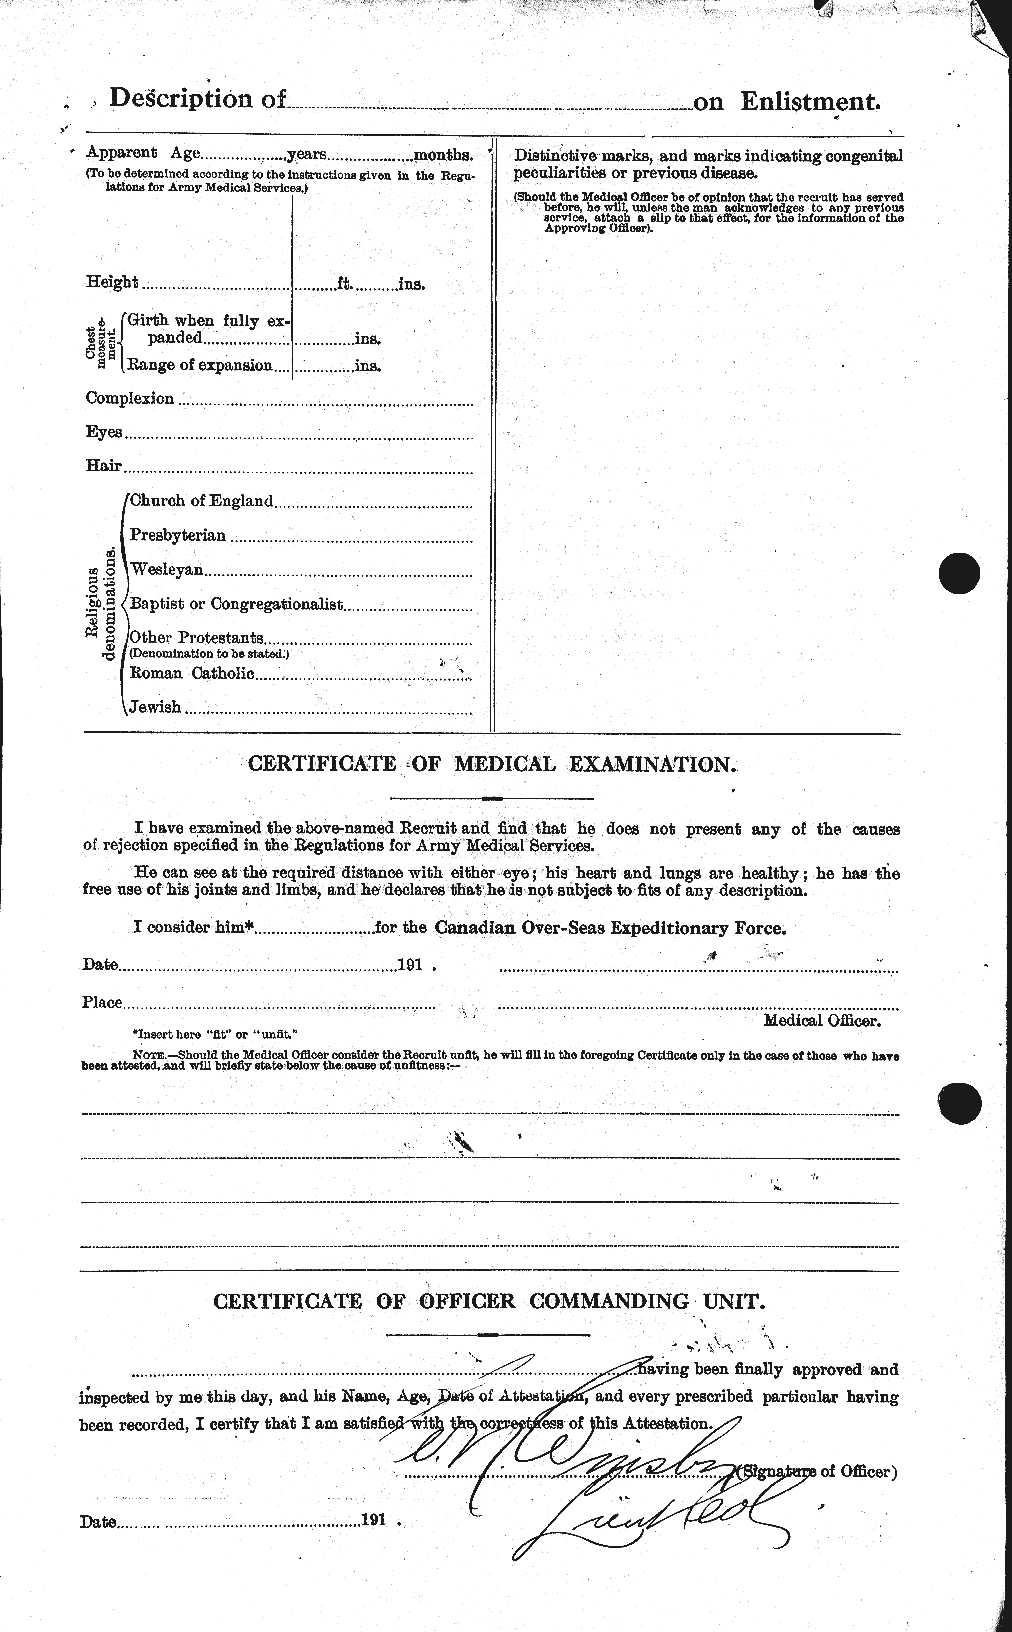 Personnel Records of the First World War - CEF 486046b